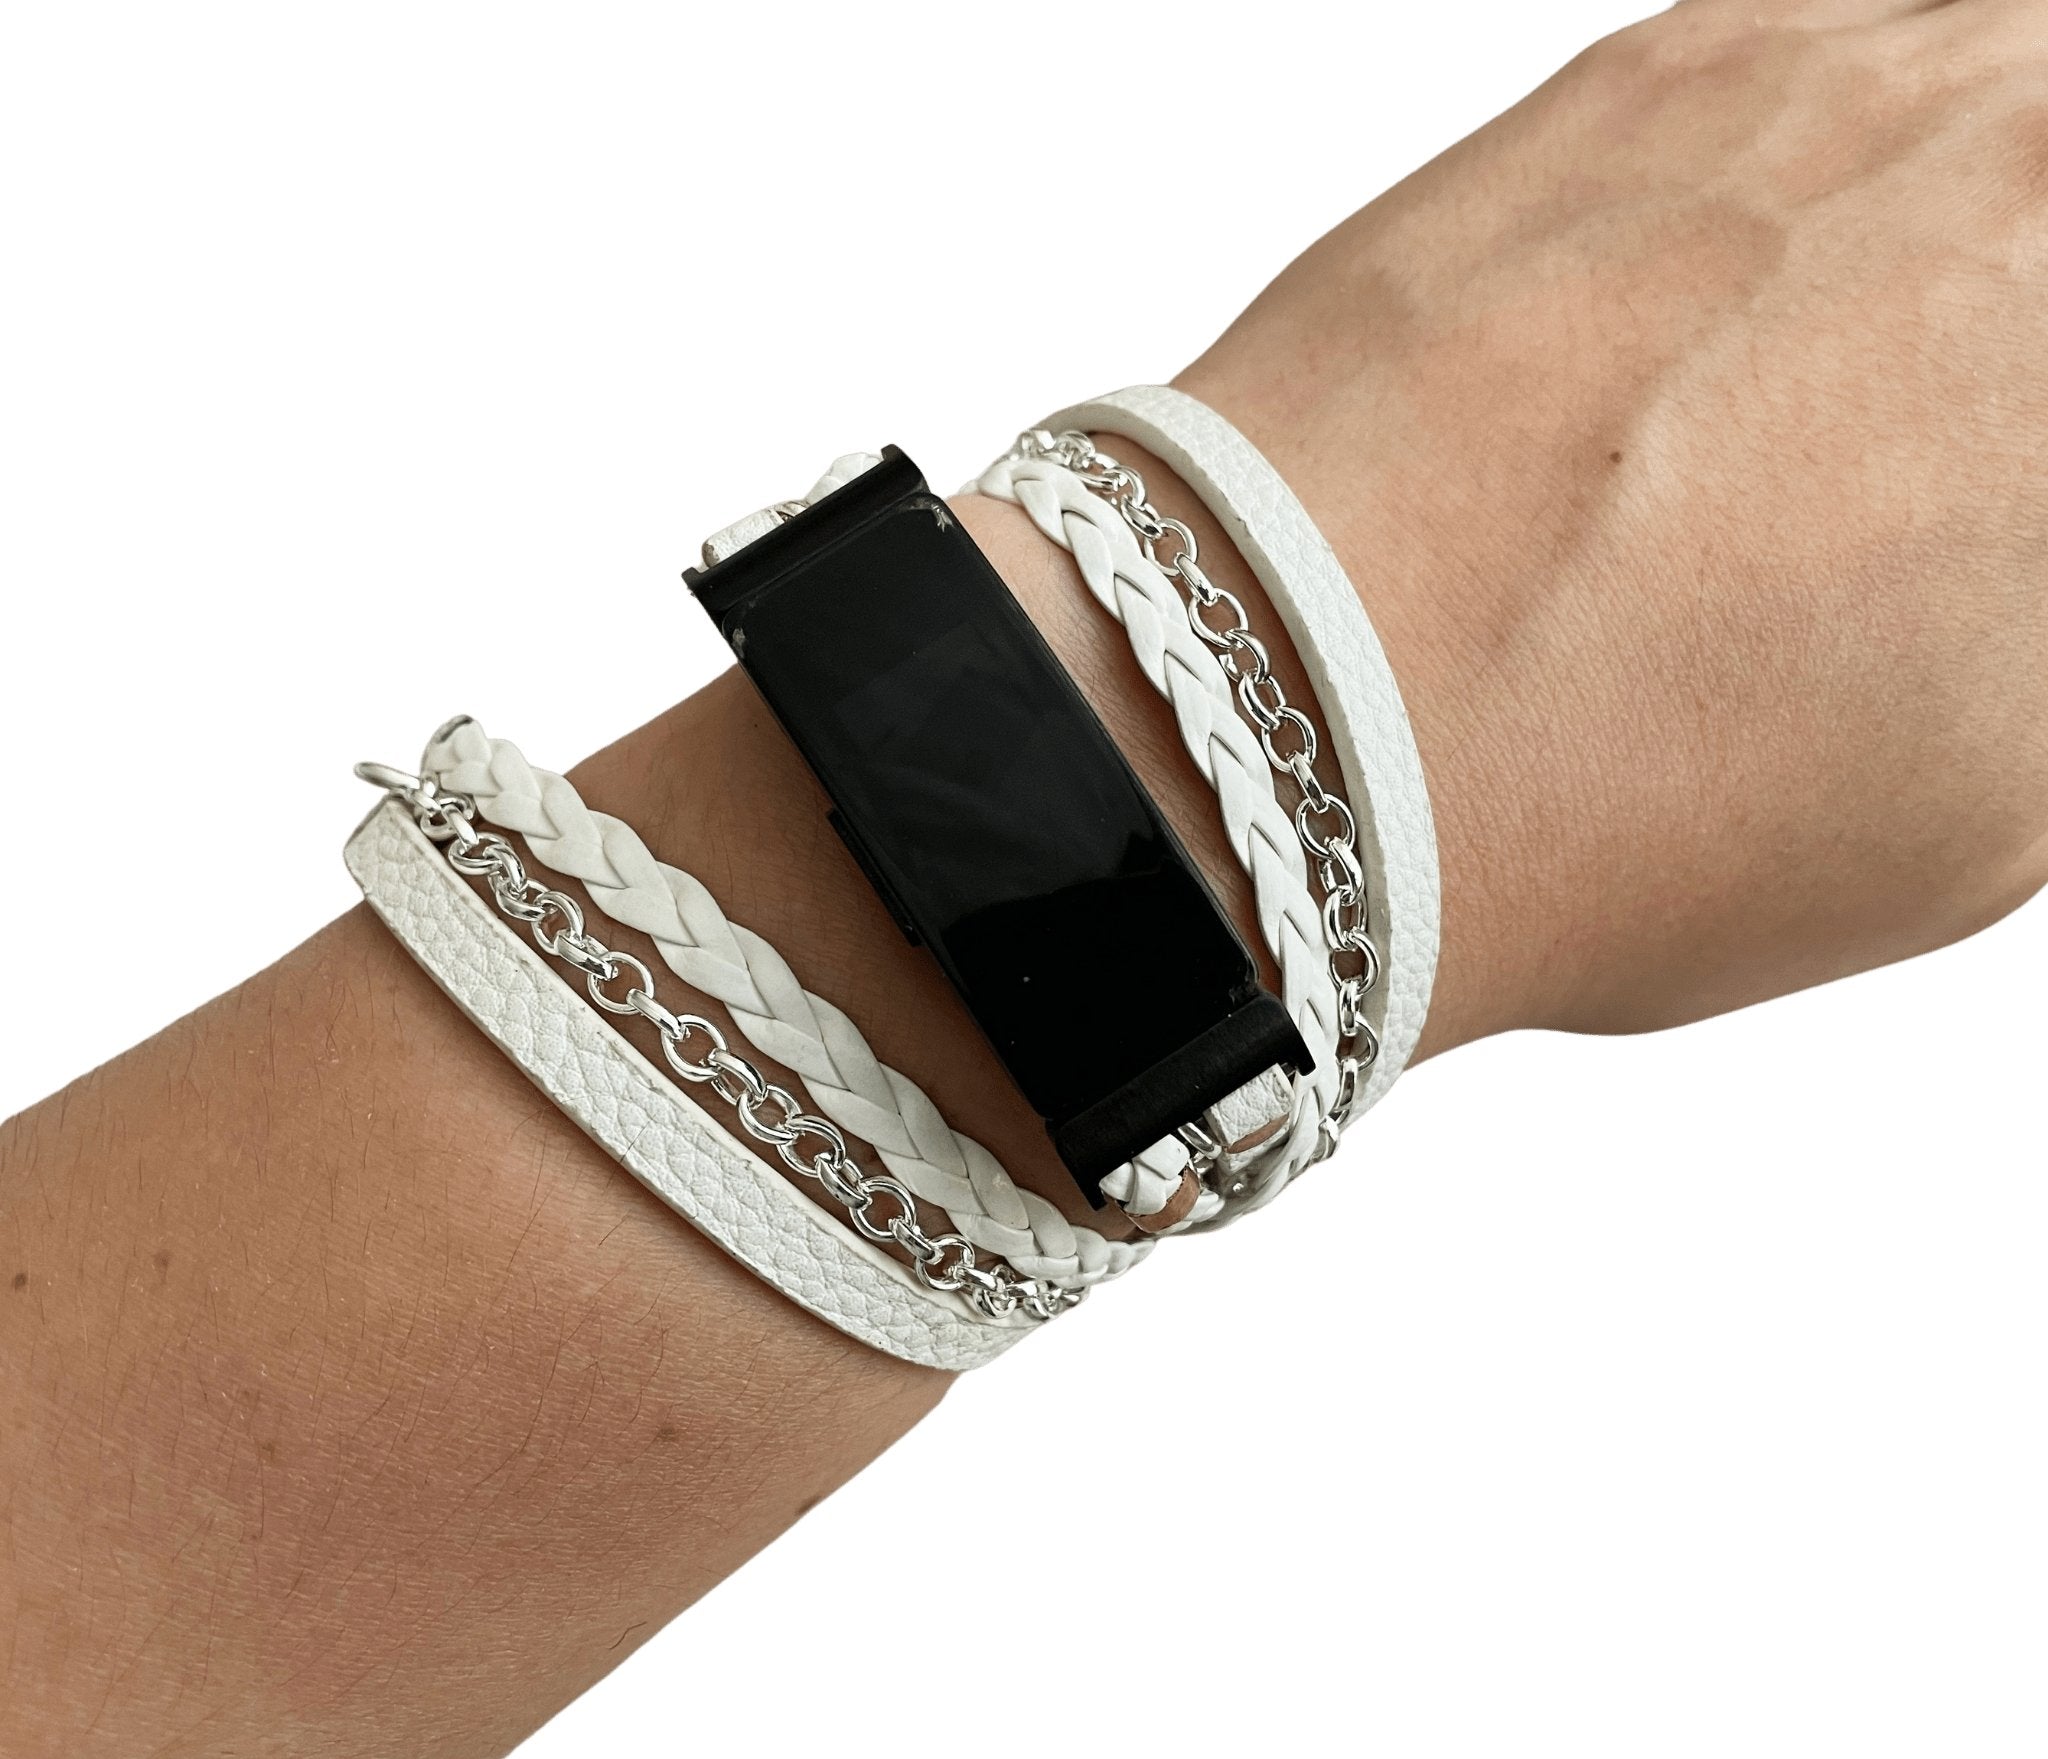 Boho Chic Wrap Leather Watch Band with Silver Chain for Fitbit Luxe - Mareevo